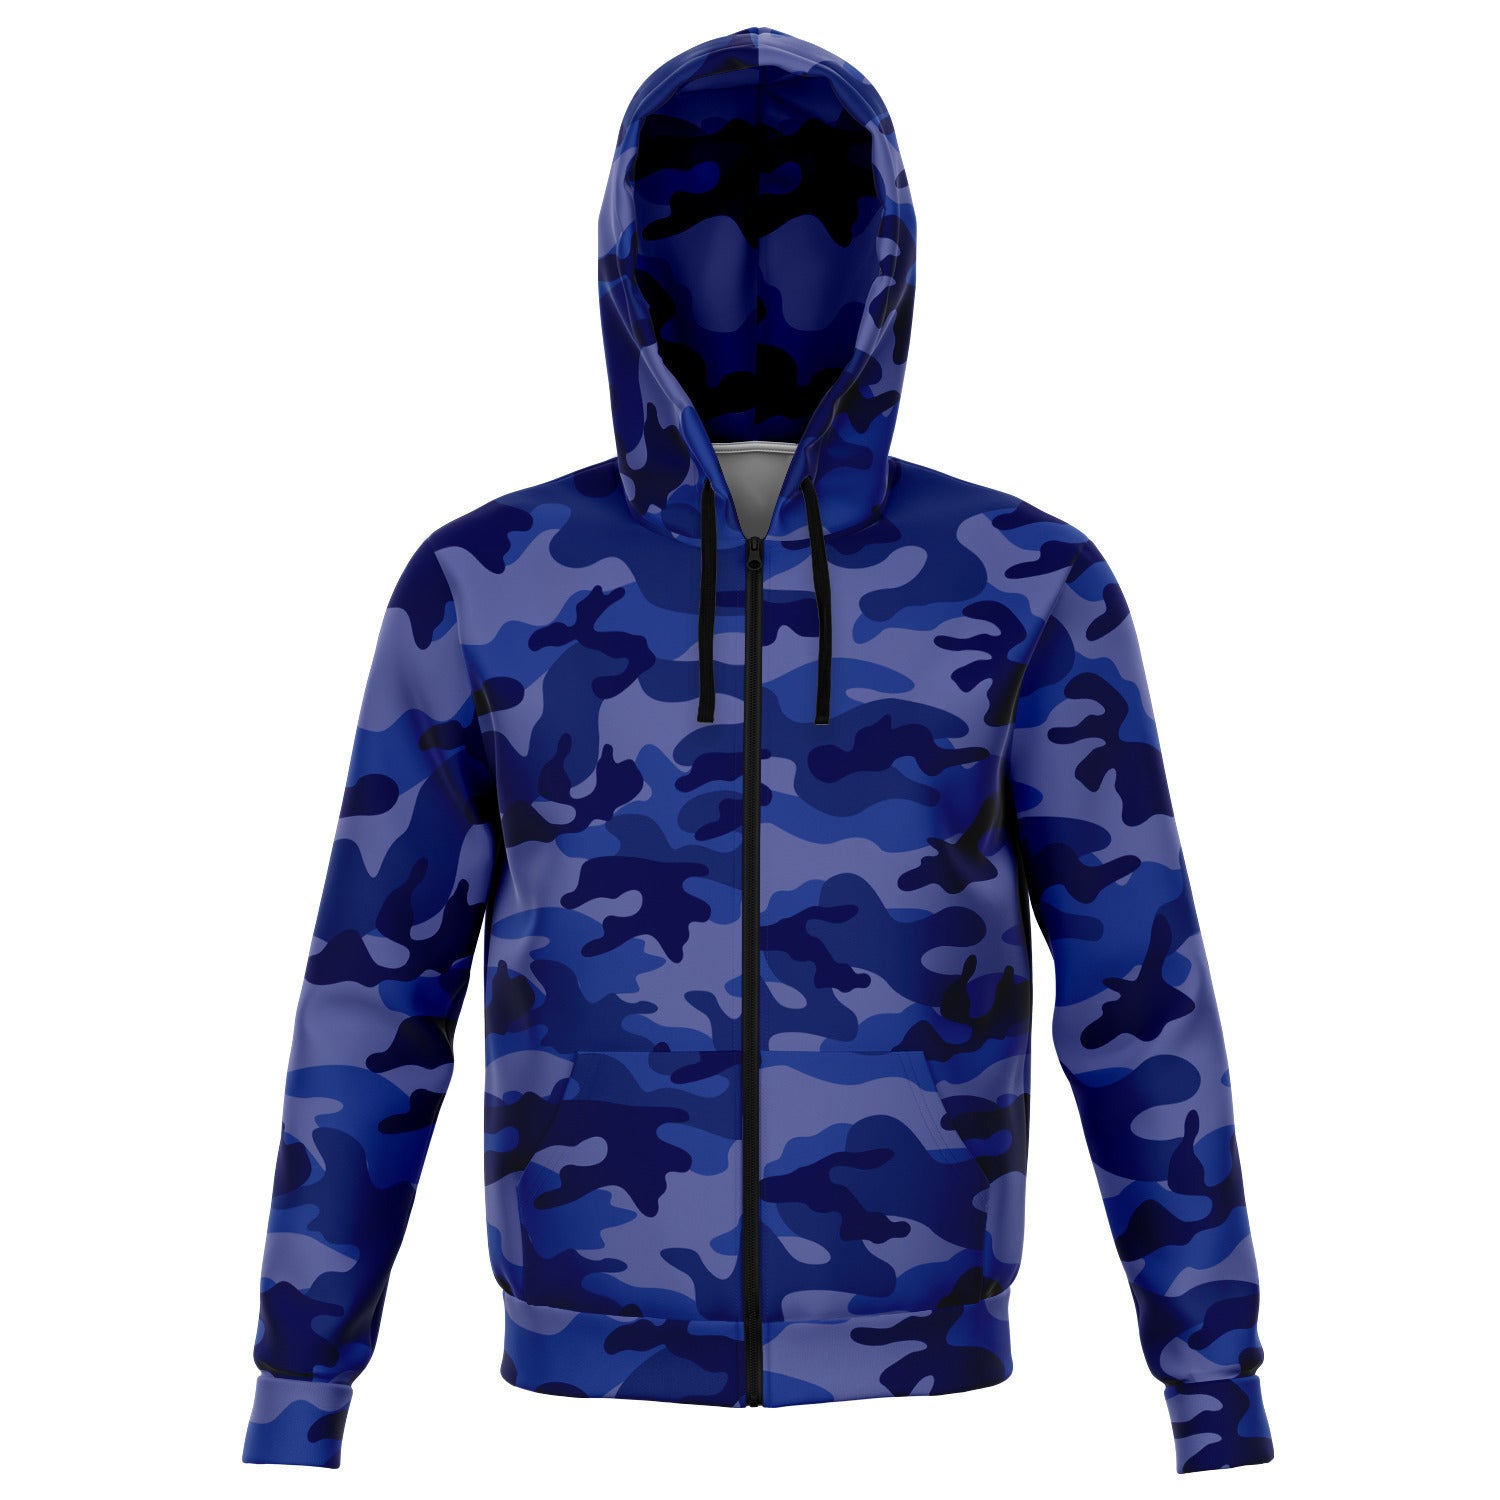 Unisex All Blue Camouflage Athletic Zip-Up Hoodie